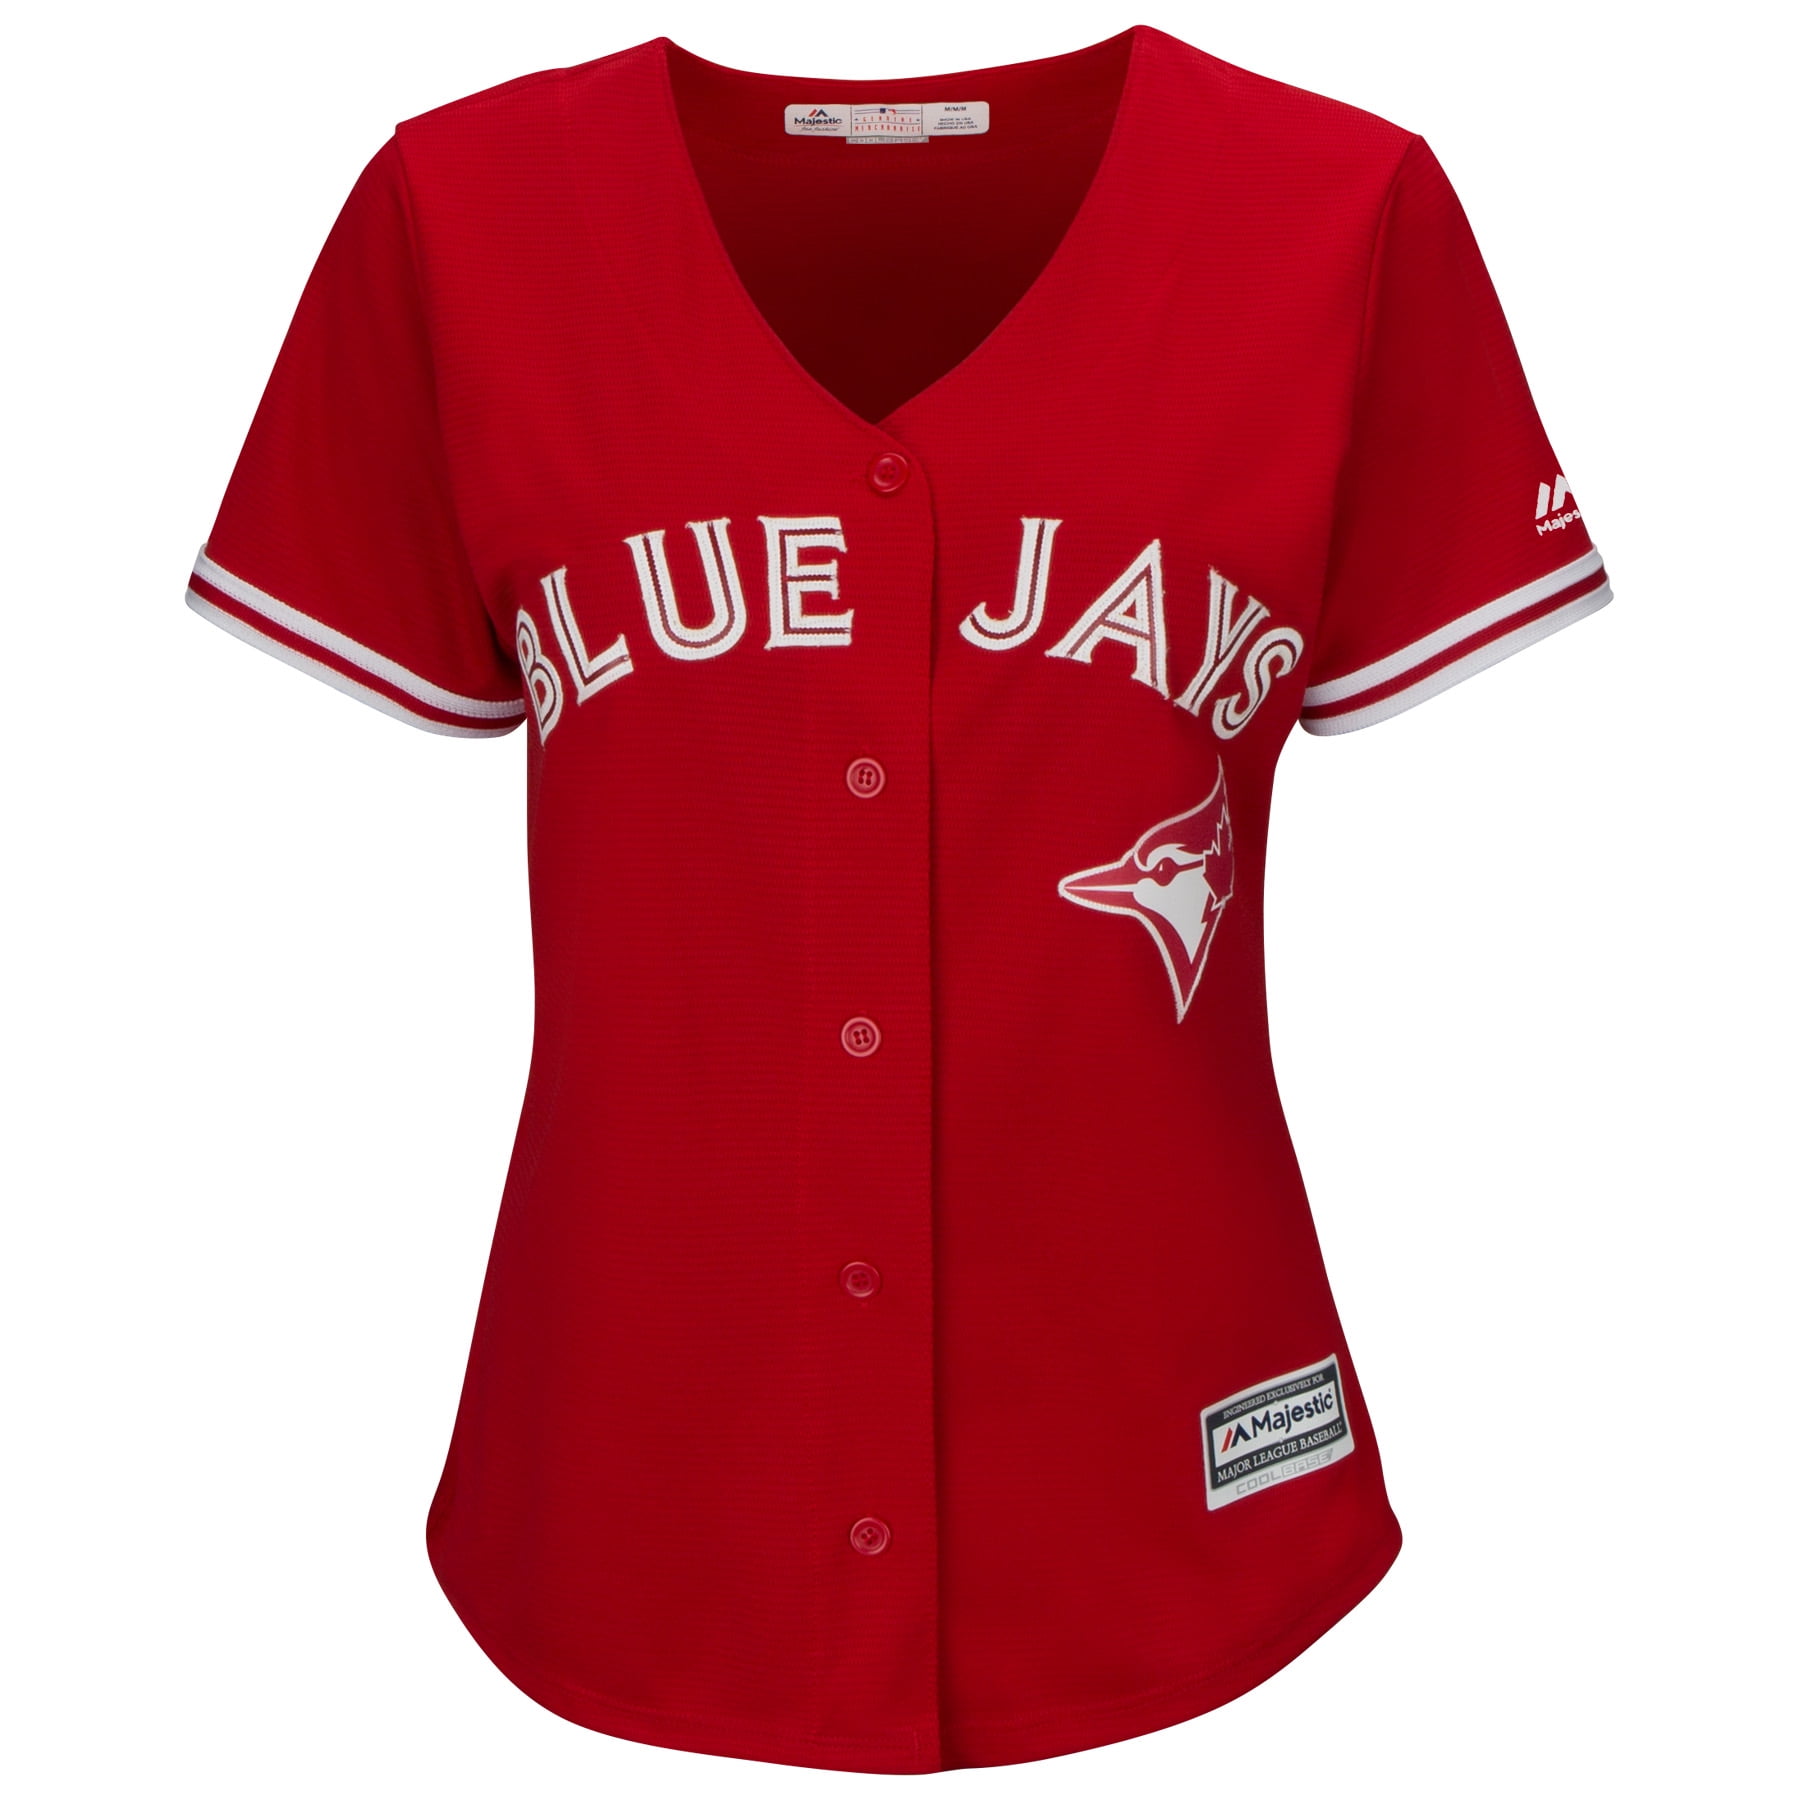 blue jays red replica jersey